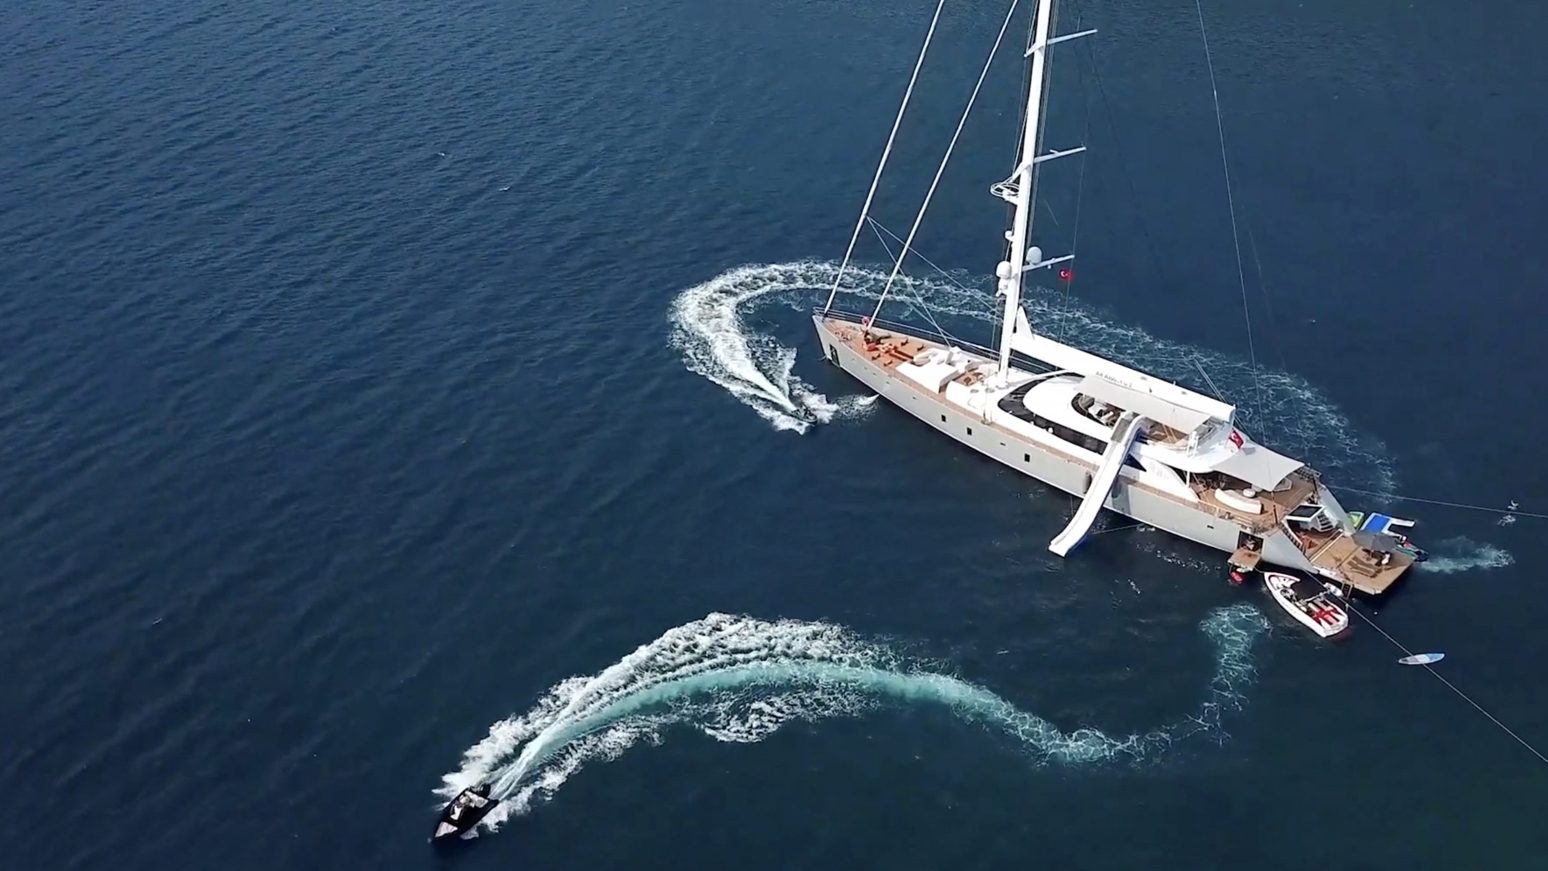 Why FunAir sailing yacht with slide